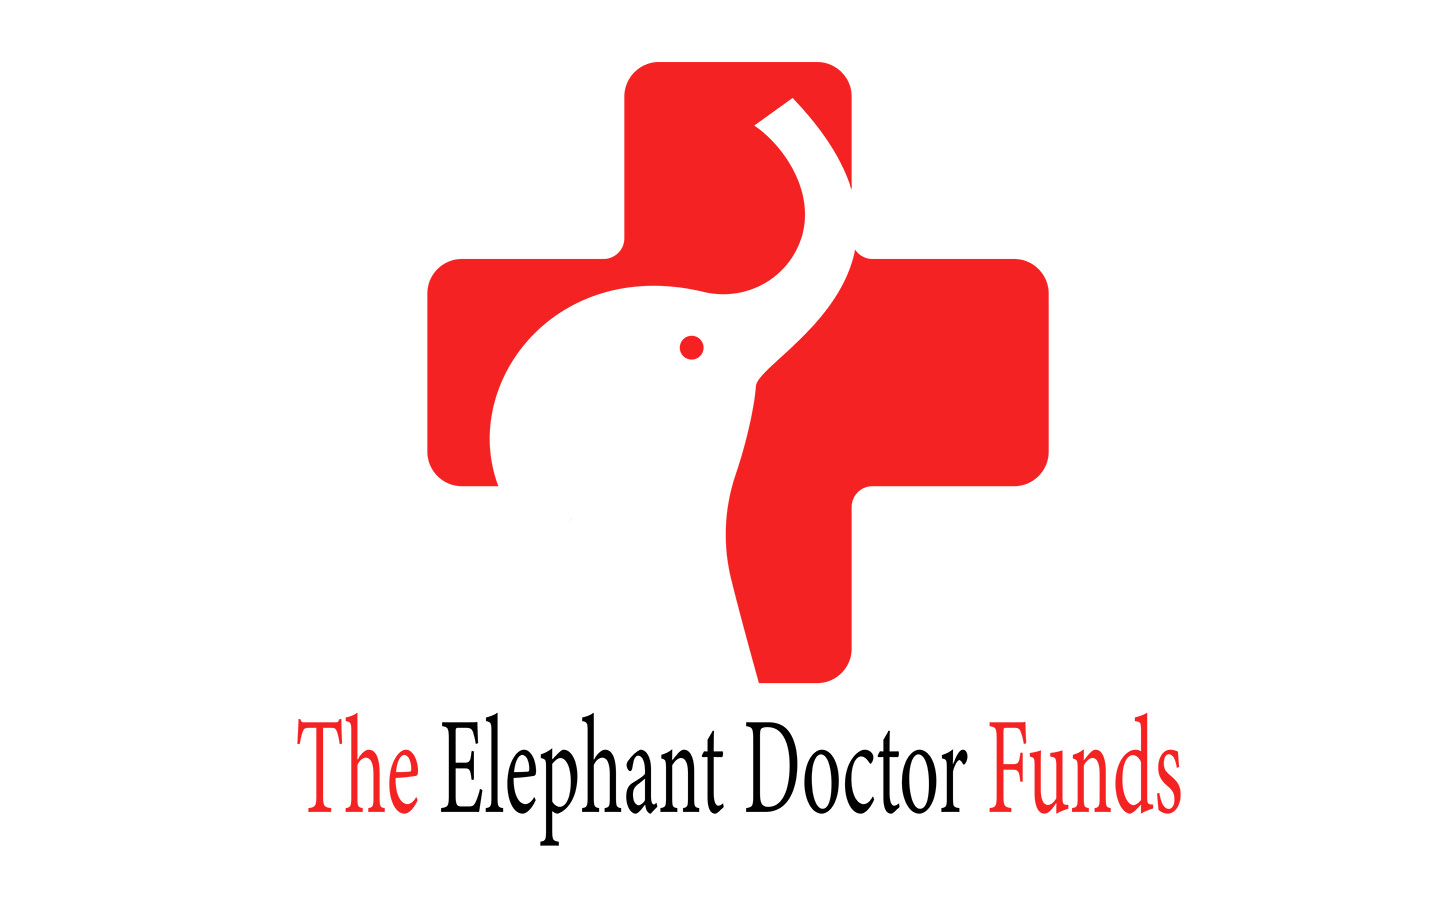 Elephant Doctor funds